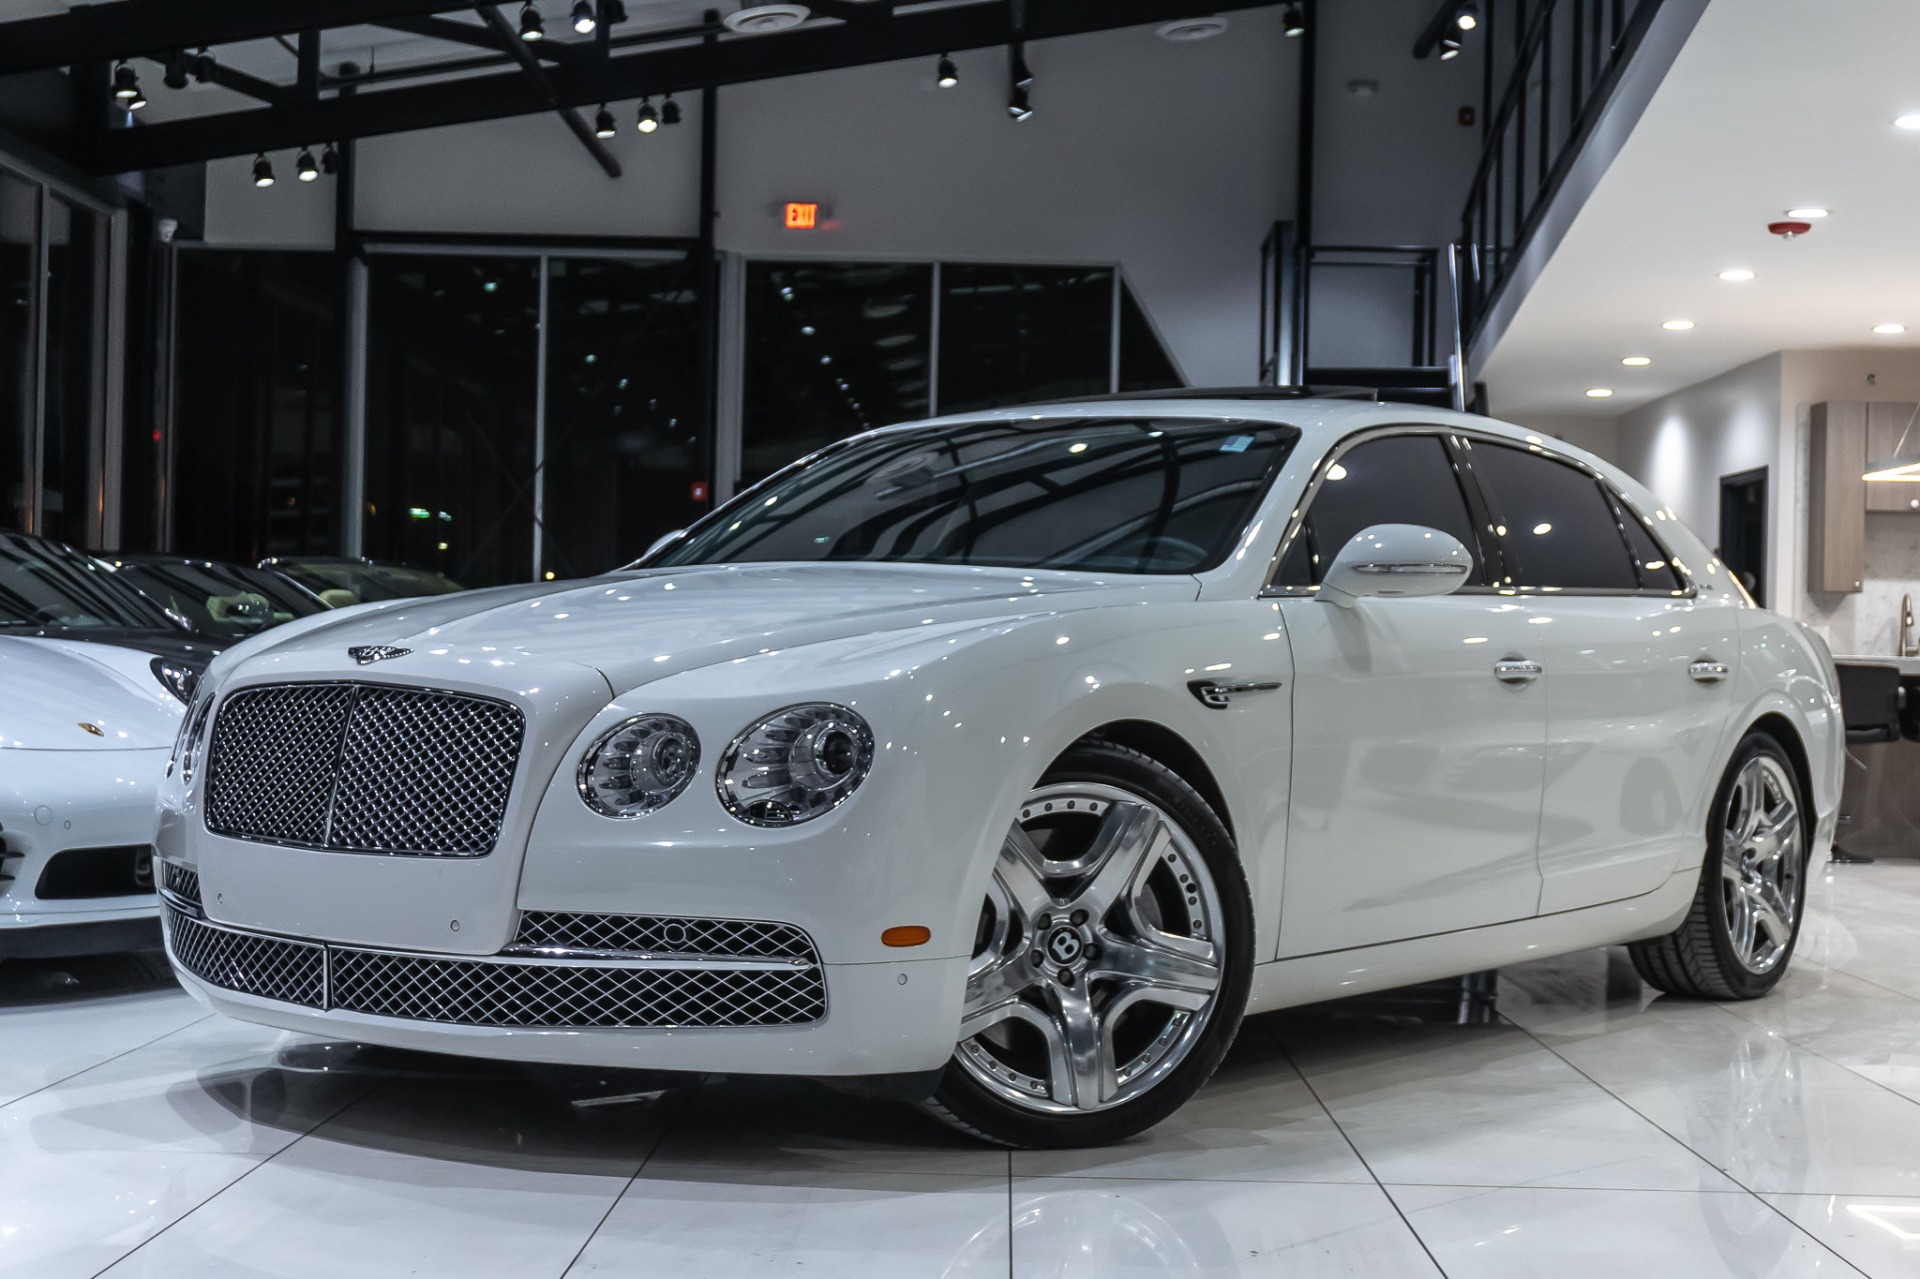 Used 2014 Bentley Flying Spur W12 Sedan LOADED Glacier White! For Sale  (Special Pricing) | Chicago Motor Cars Stock #16689A